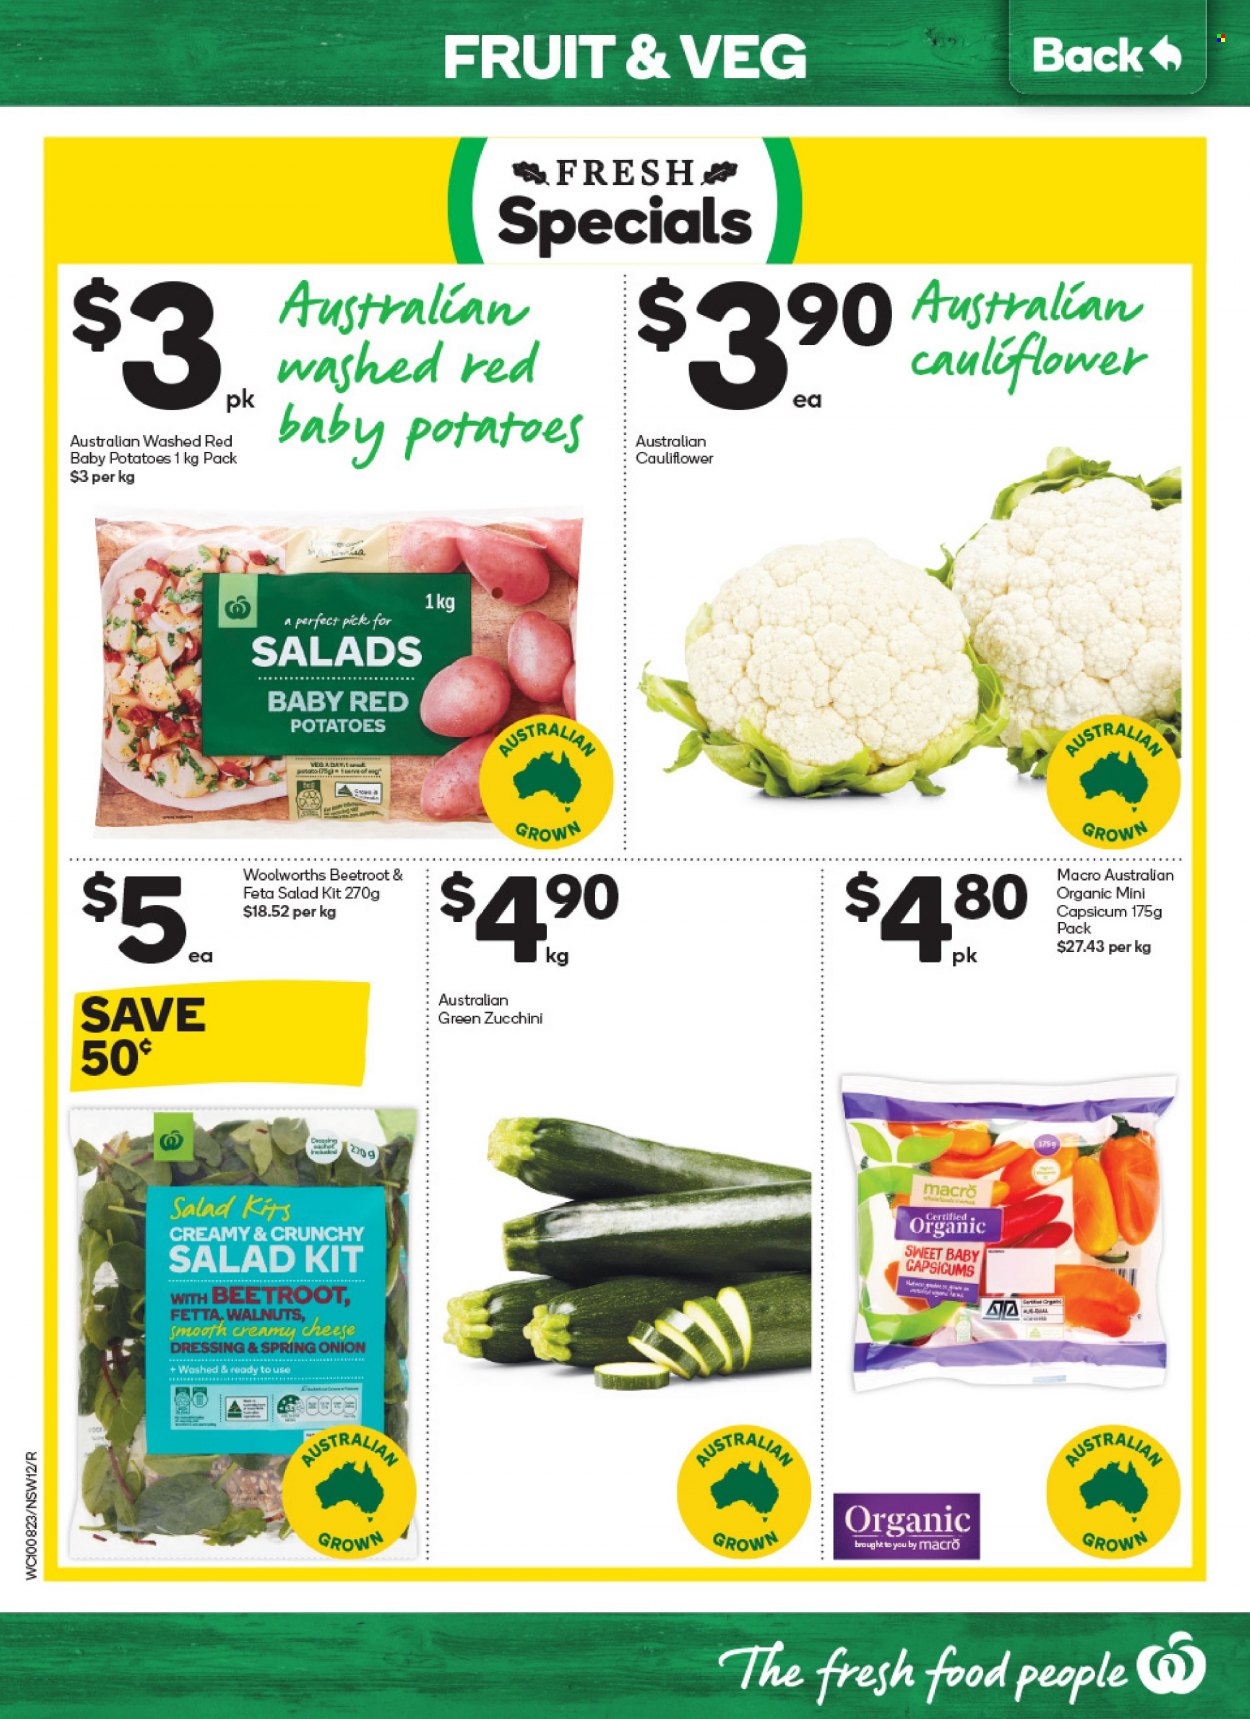 Woolworths catalogue - 10.8.2022 - 16.8.2022.